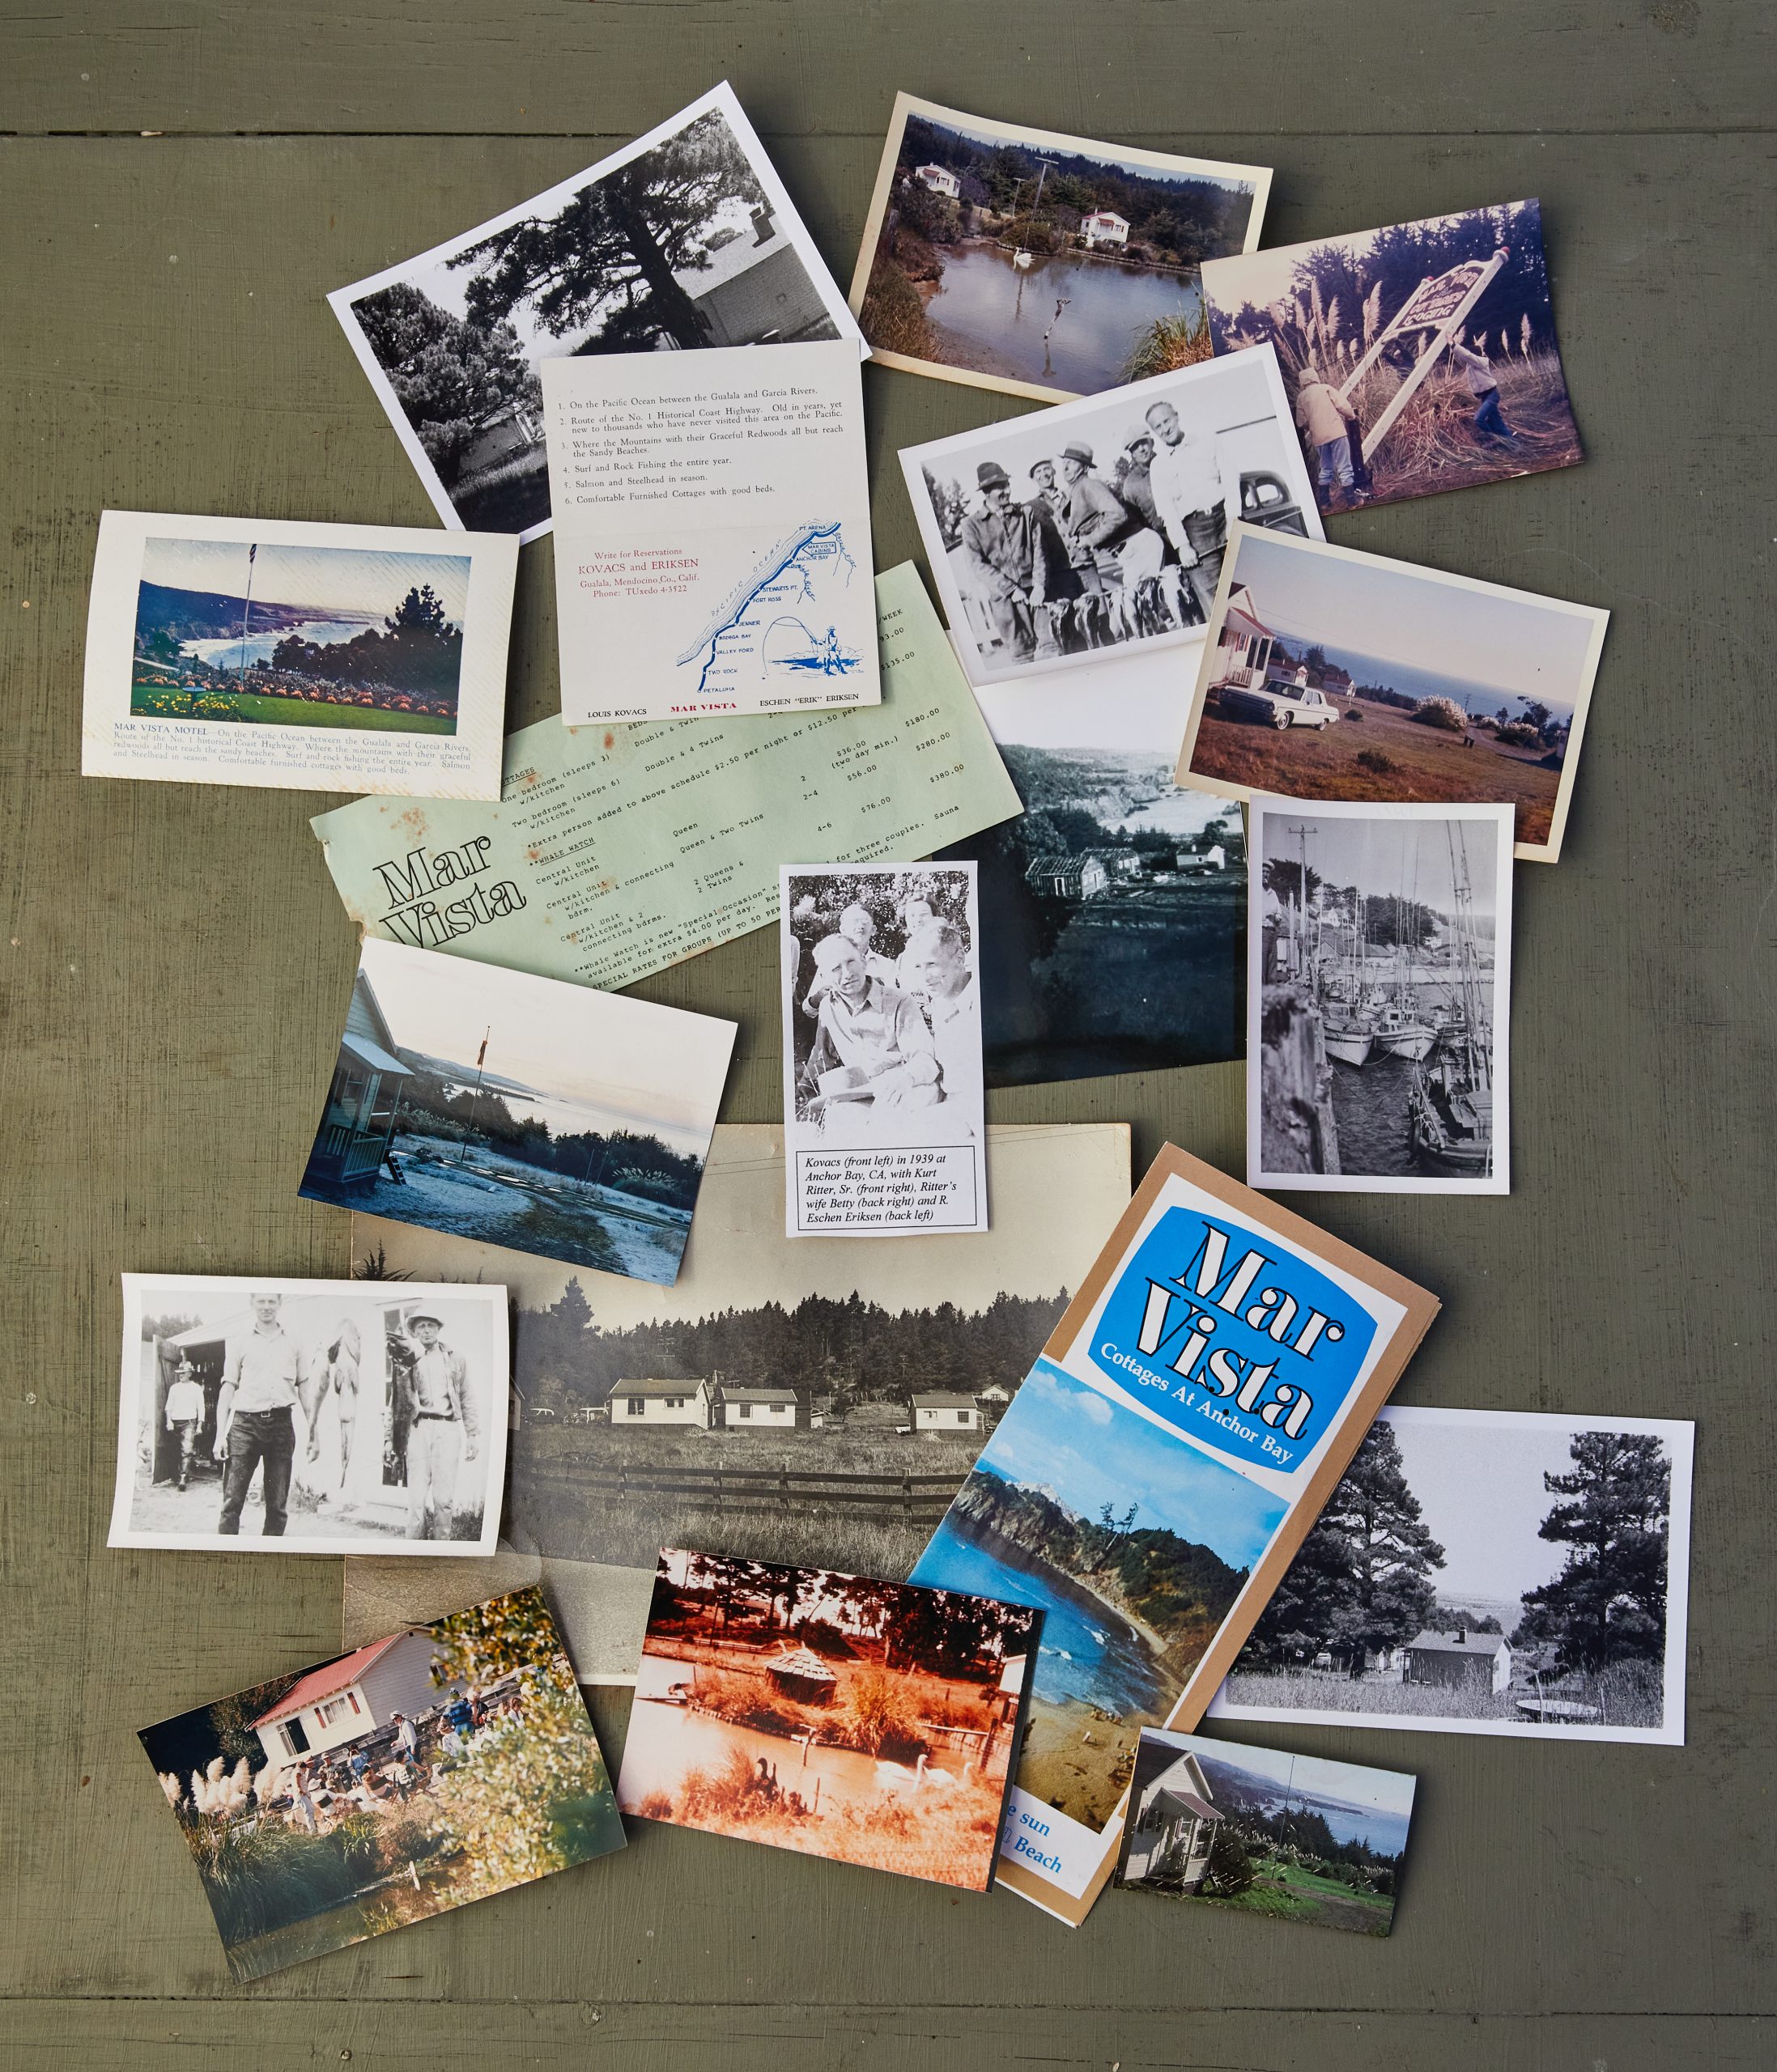 Image of photos and brochures of Mar Vista throughout the decades of it's existence